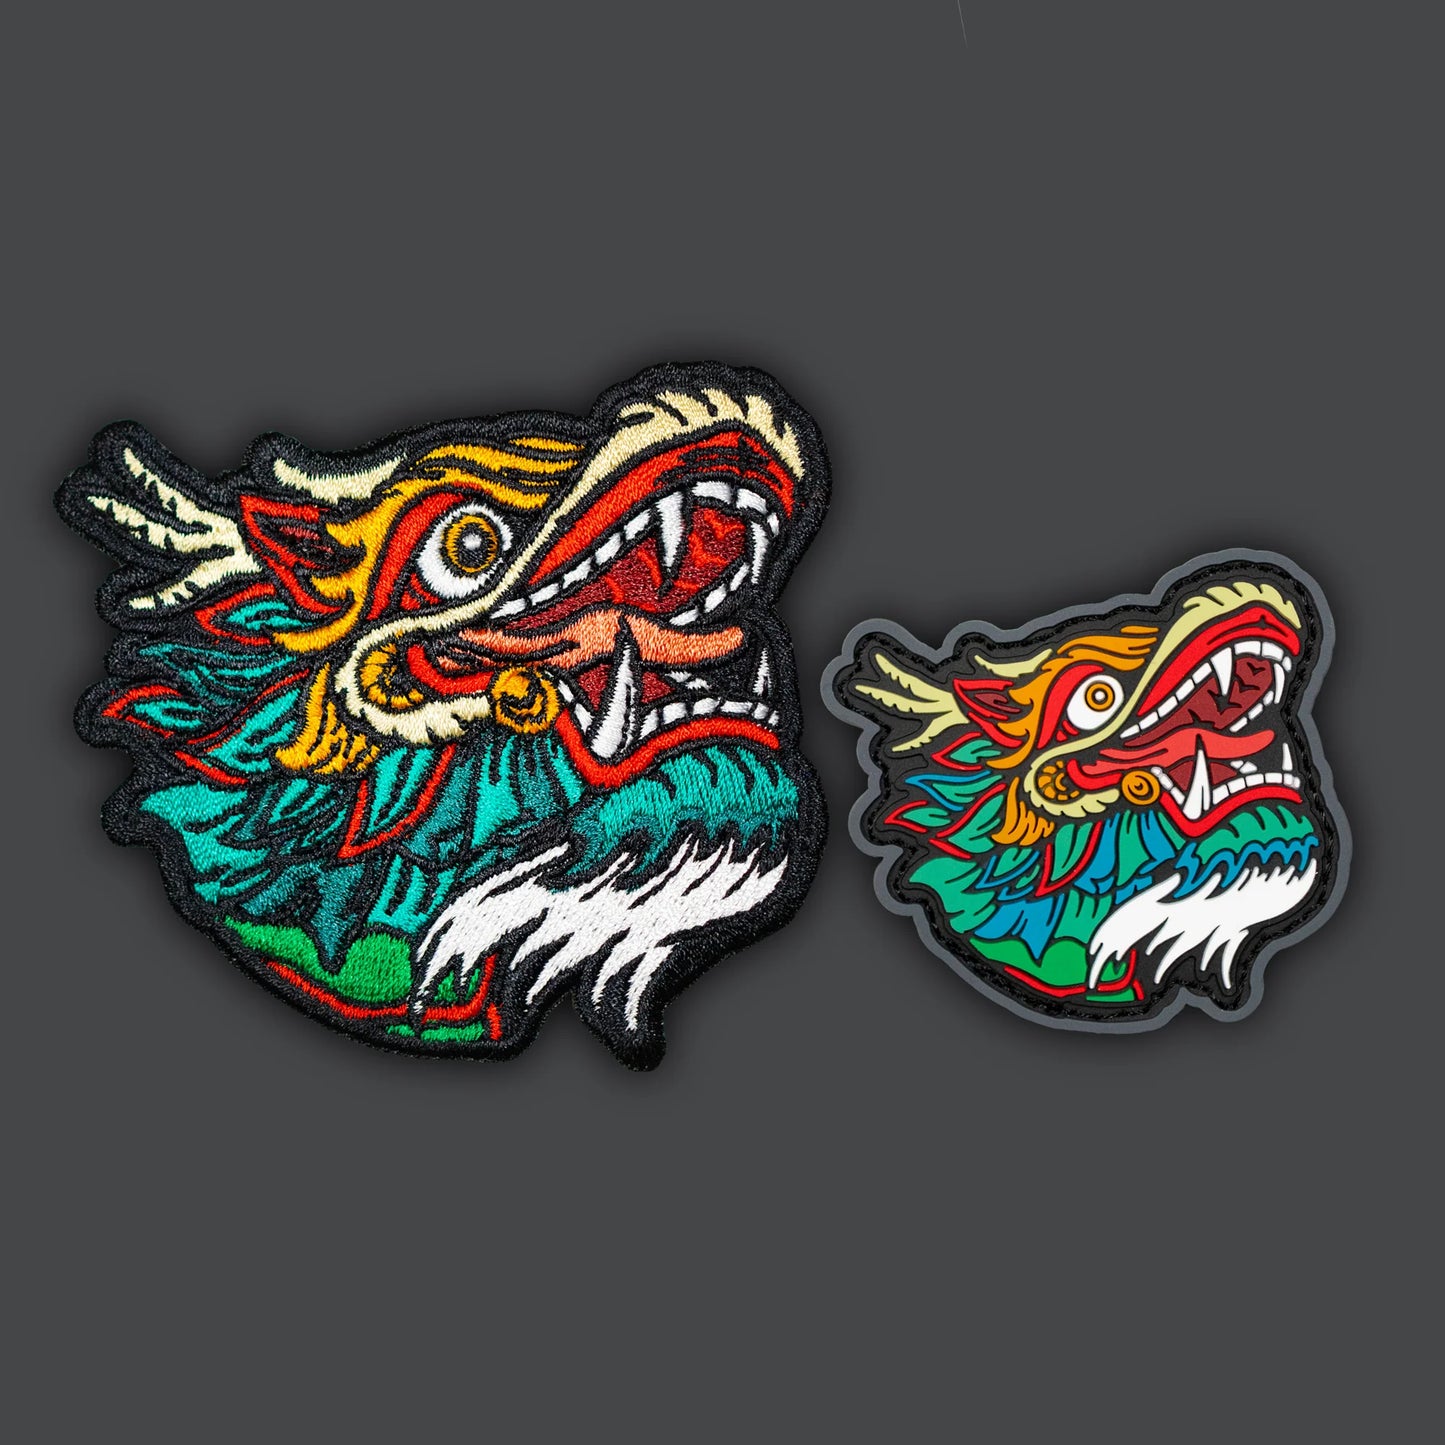 Year of the Dragon Morale Patch Set